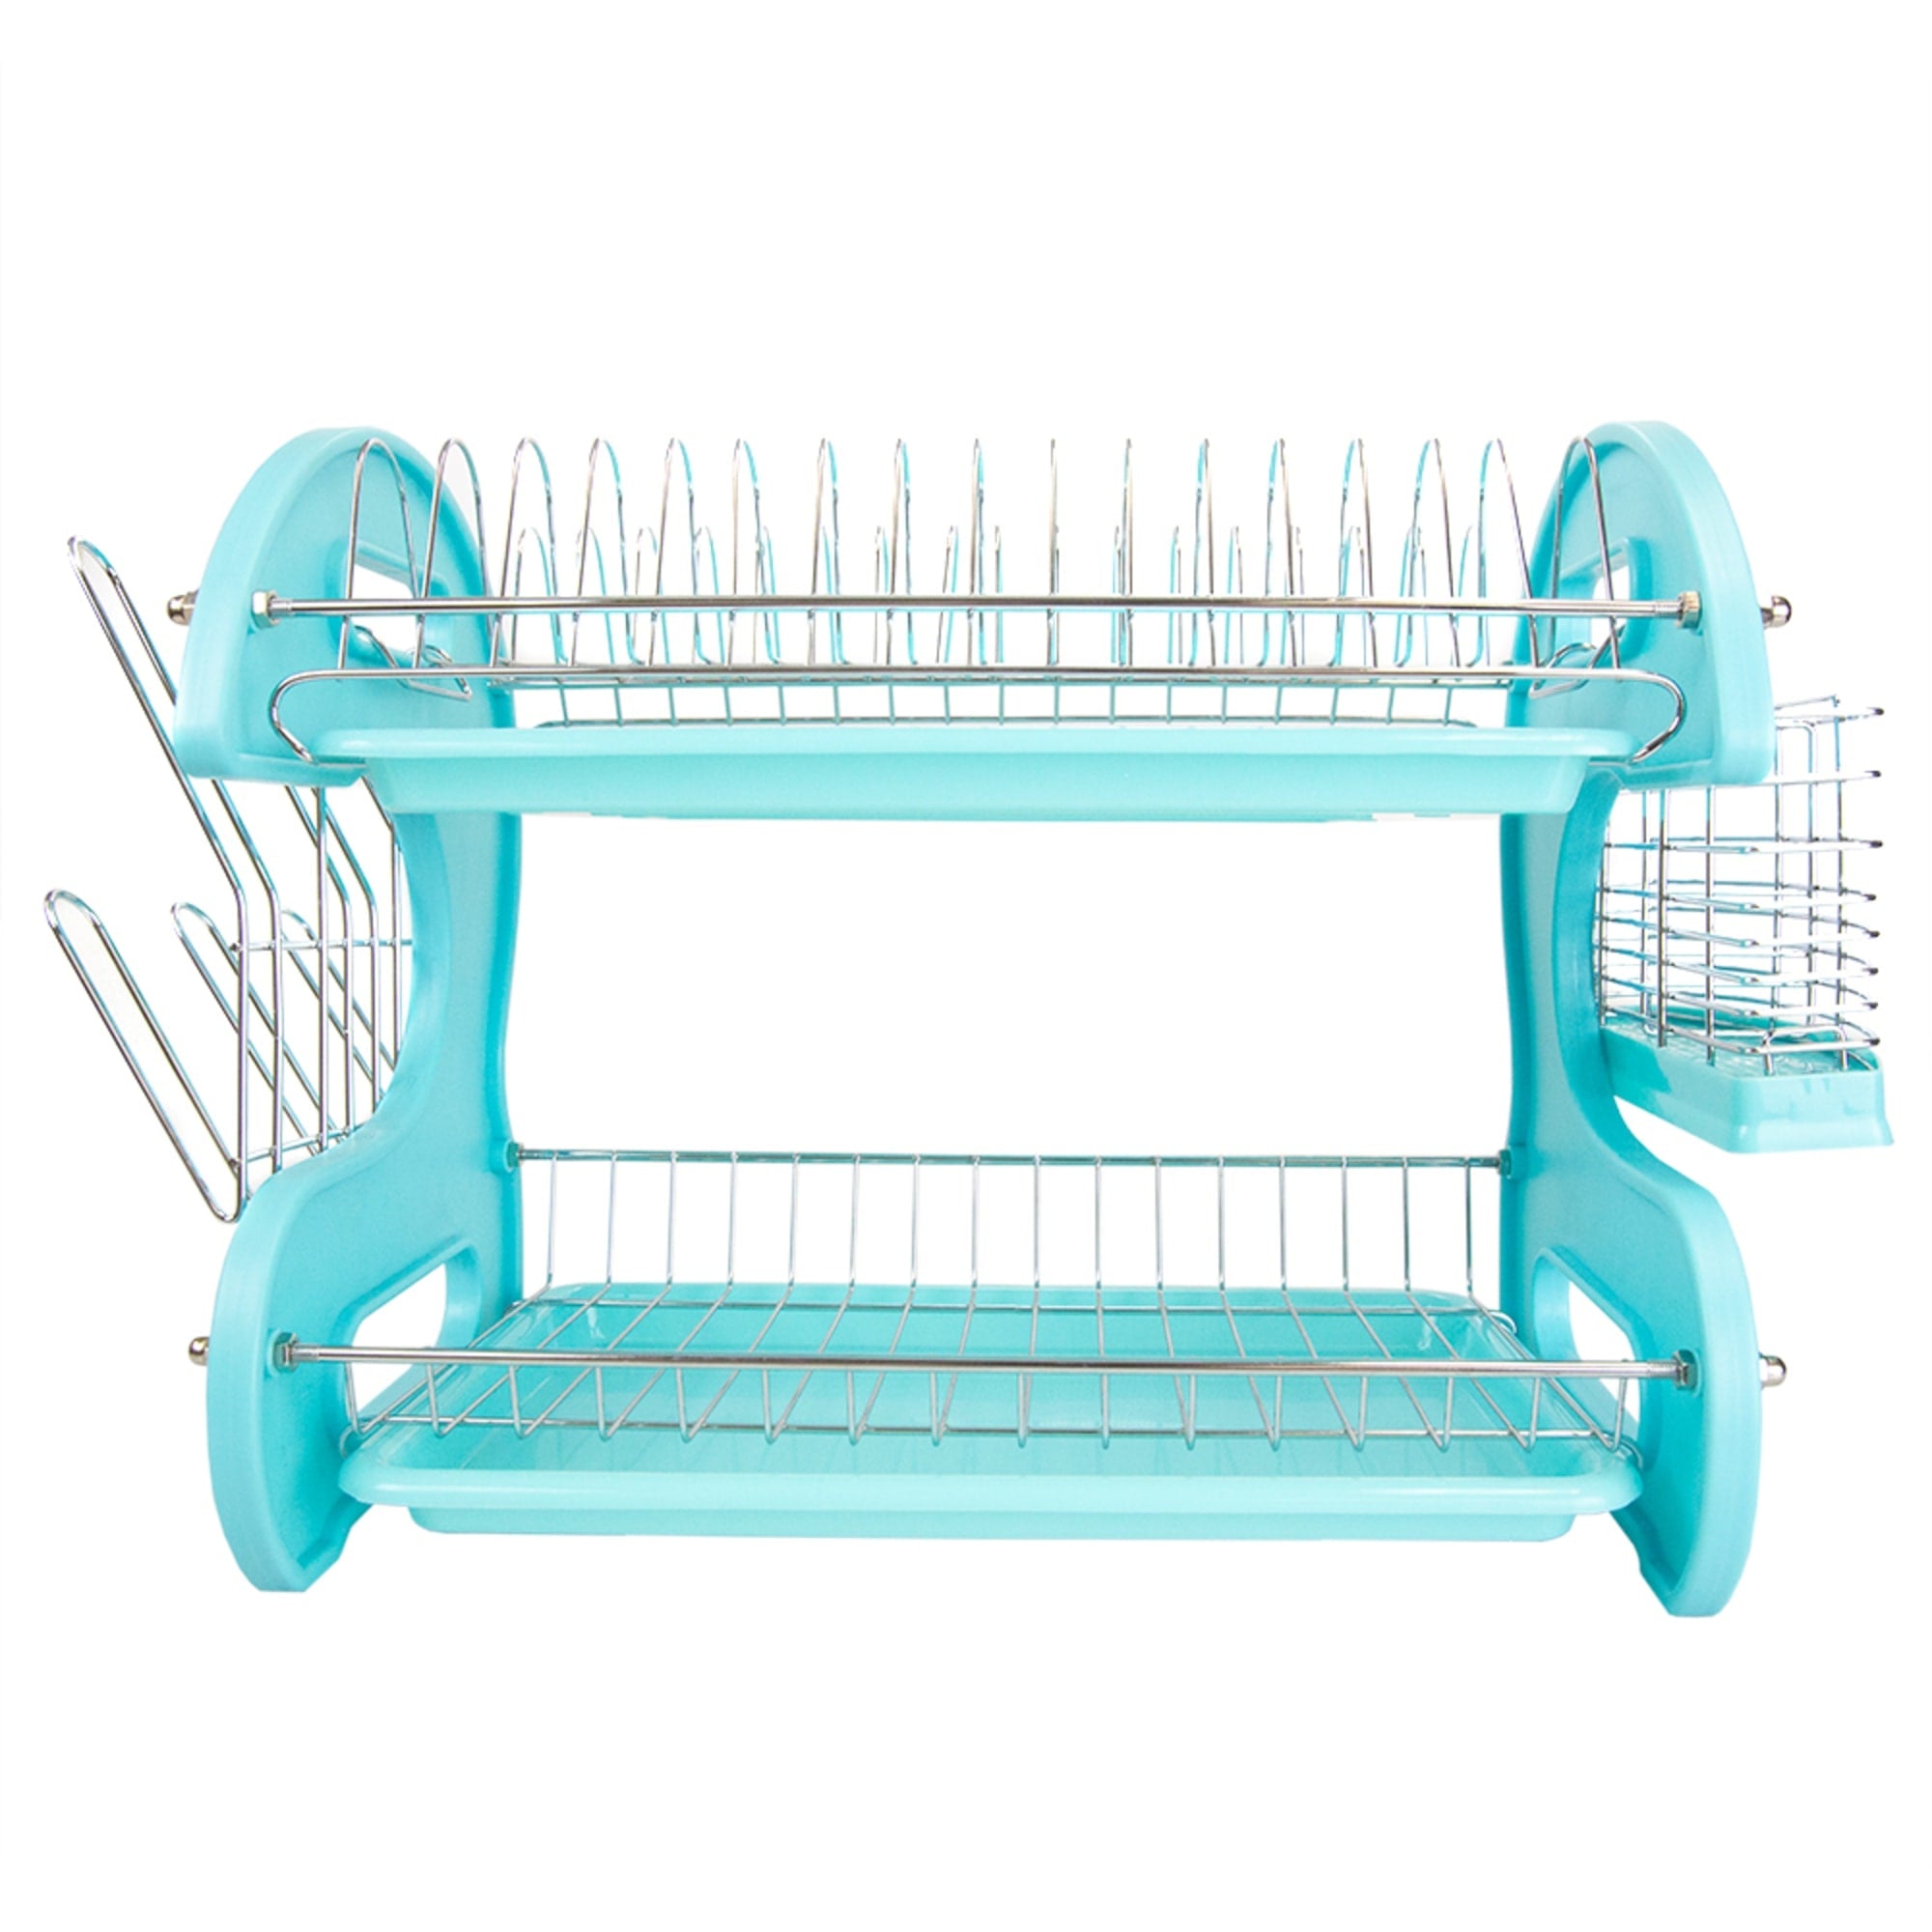 Home Basics 2 Tier Plastic Dish Drainer, Turquoise $20.00 EACH, CASE PACK OF 6